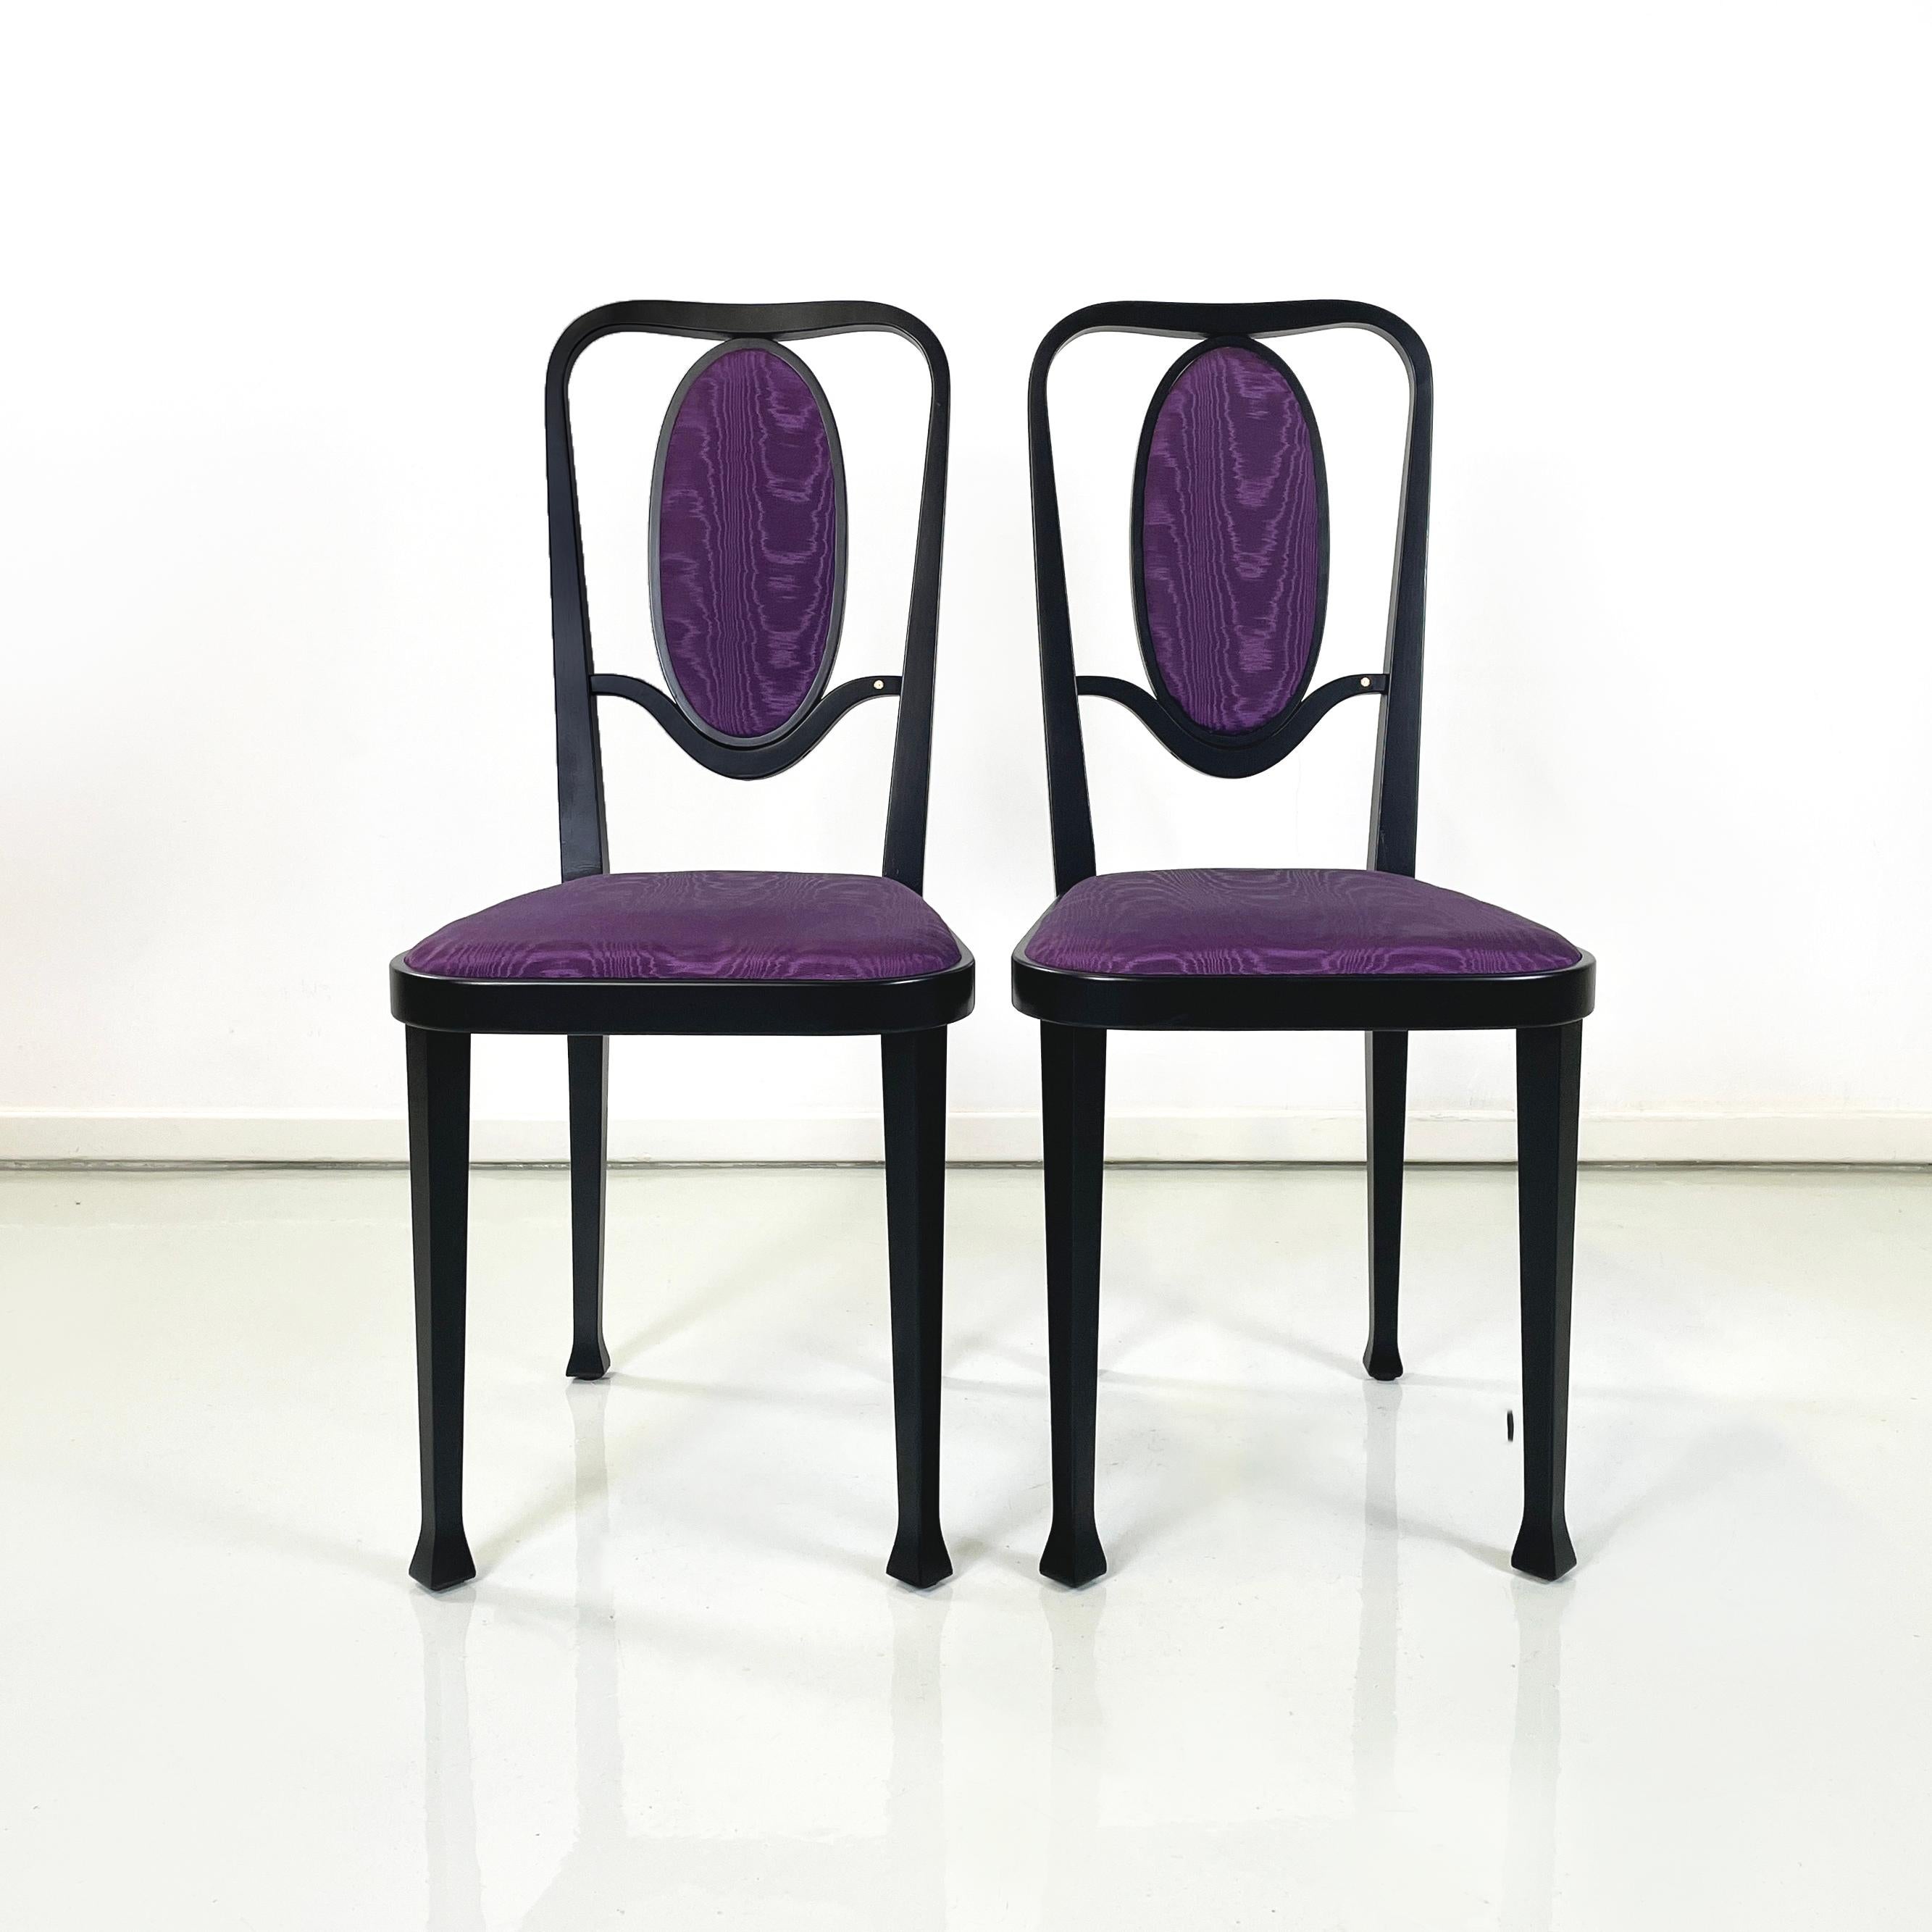 Modern Austrian modern Chairs 414 in black wood purple fabric by Kammerer Thonet, 1990s For Sale